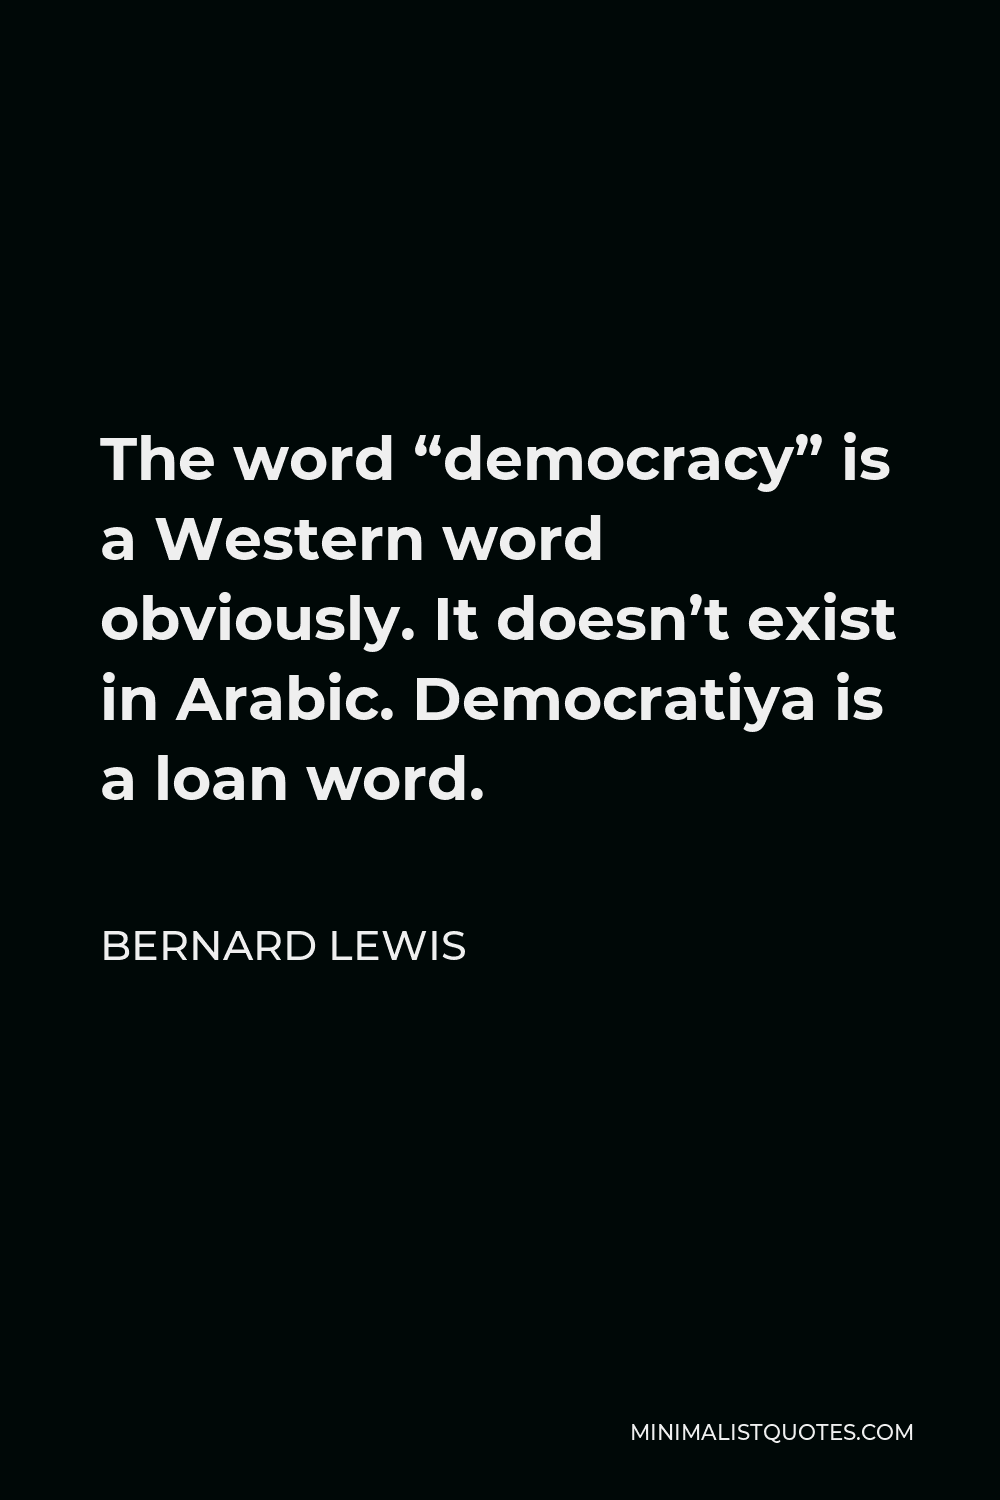 Bernard Lewis Quote - The word “democracy” is a Western word obviously. It doesn’t exist in Arabic. Democratiya is a loan word.